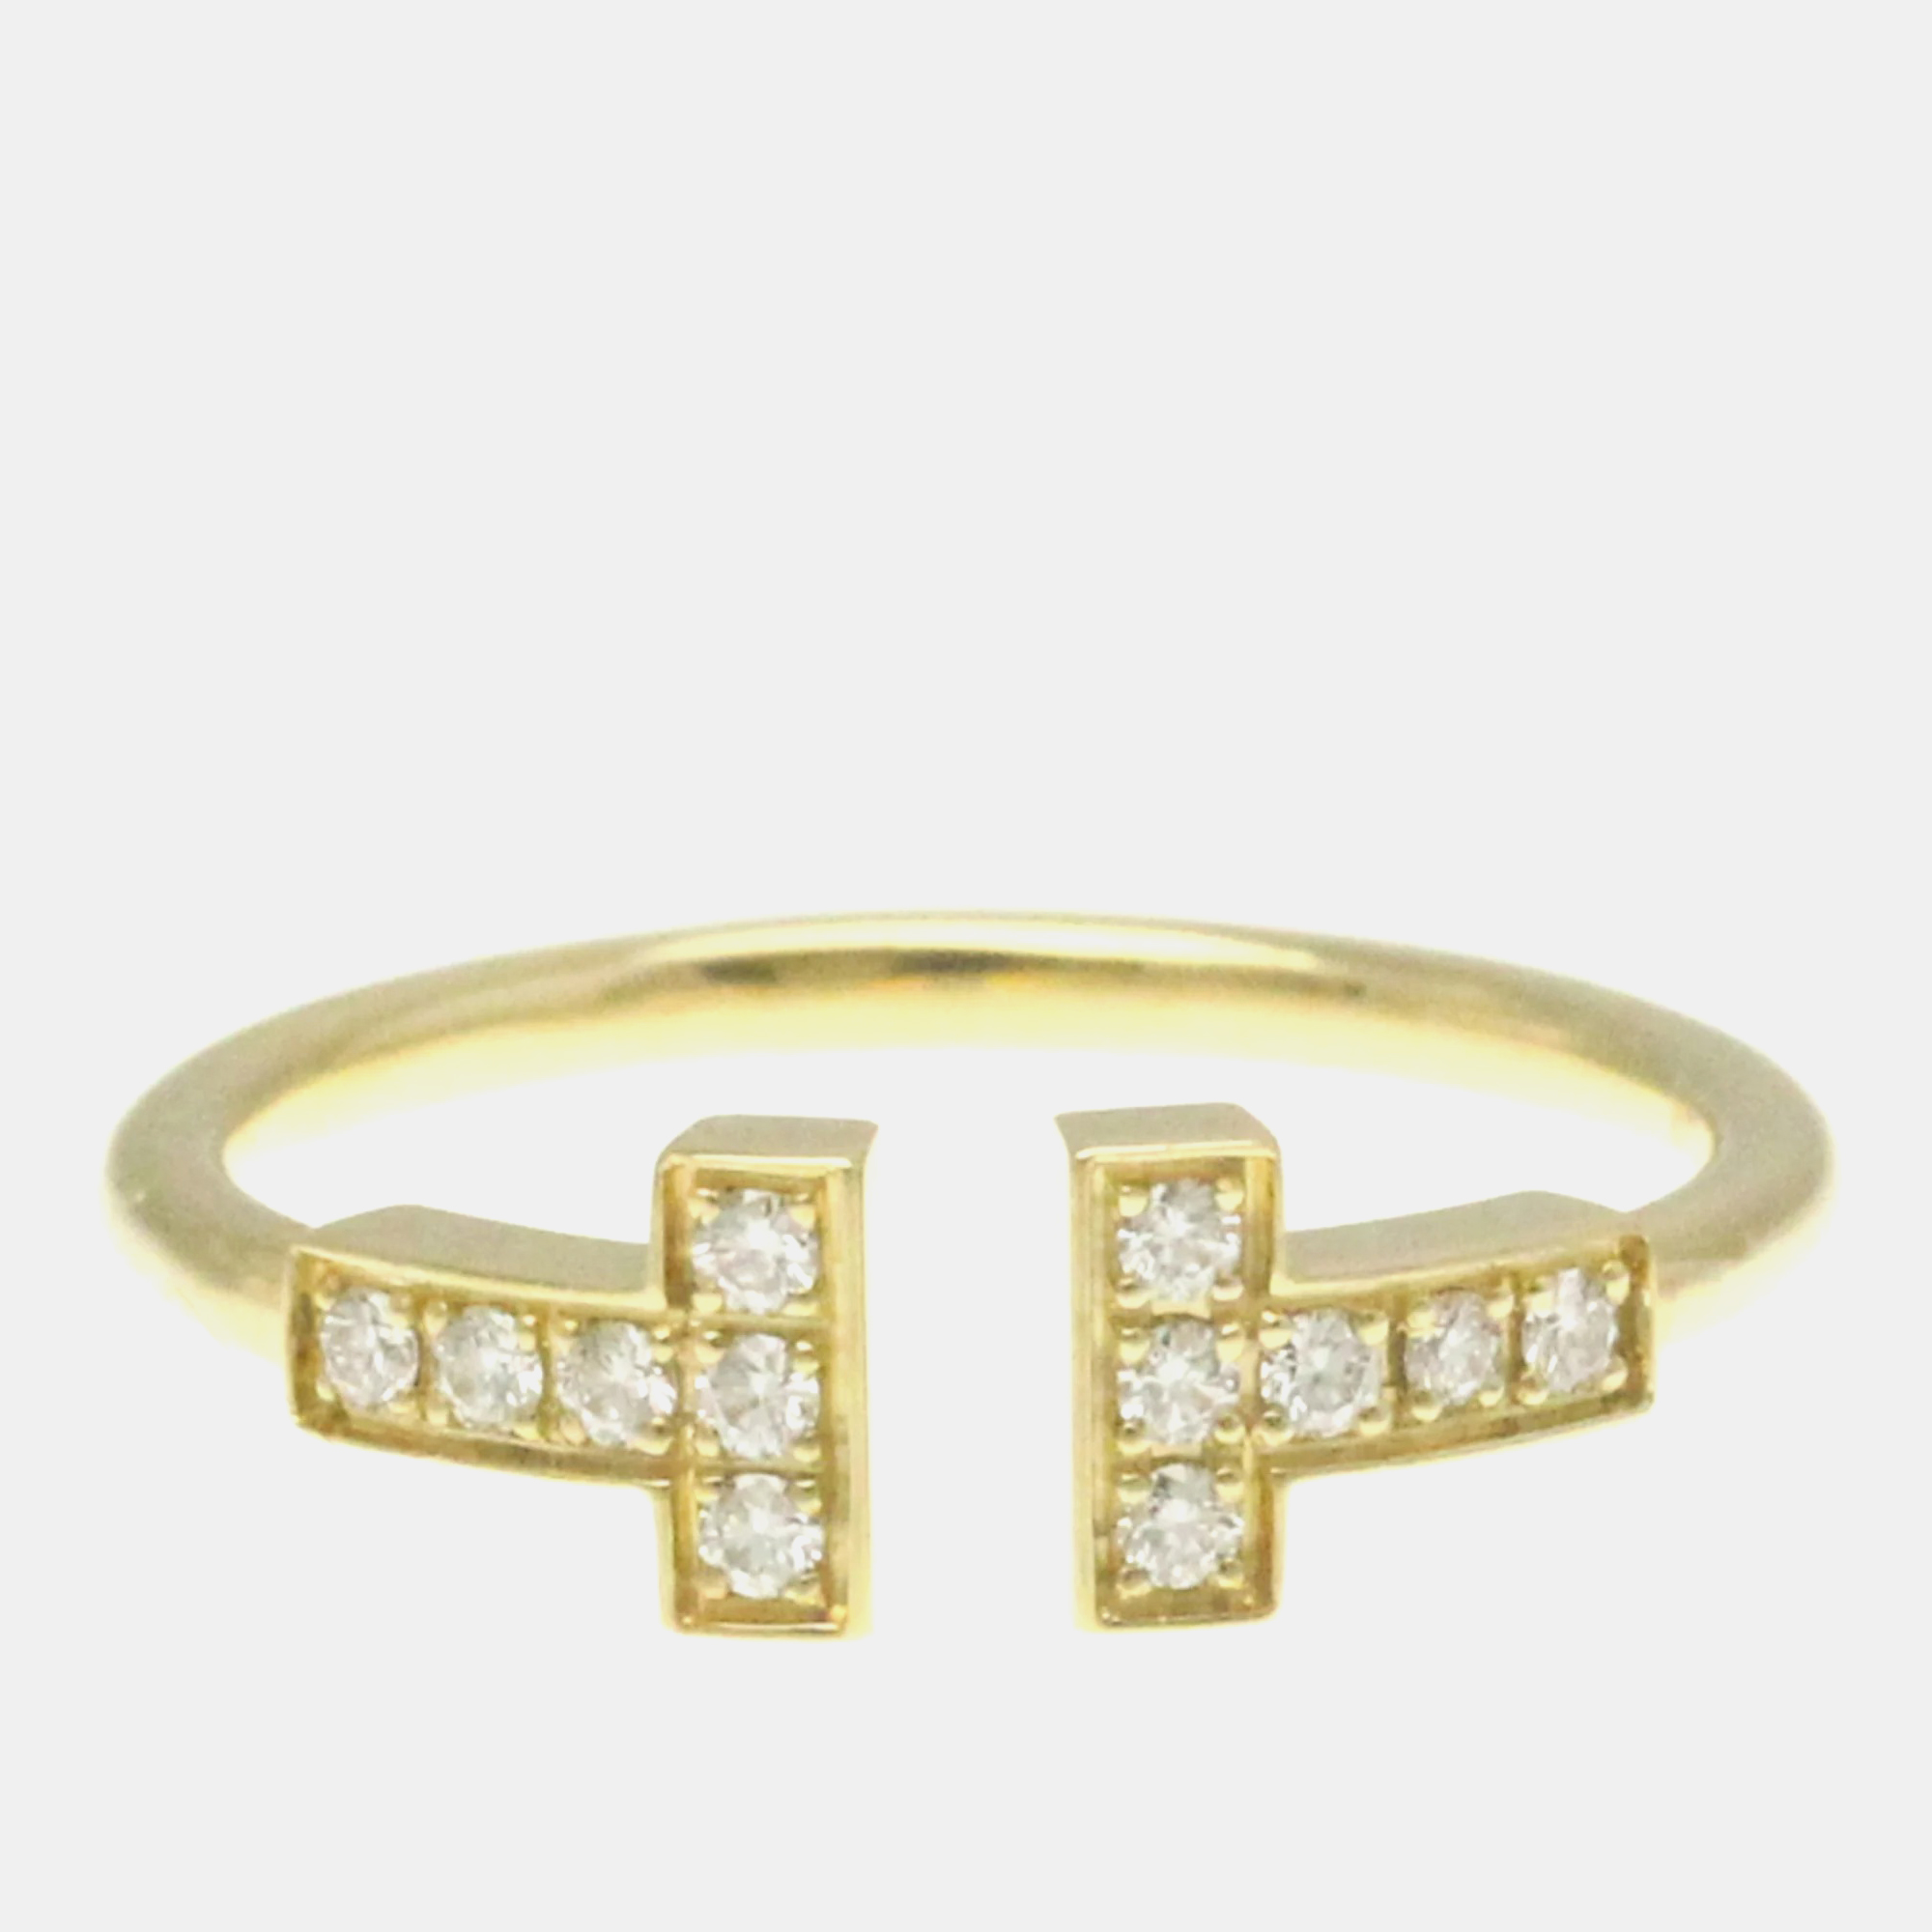 Tiffany & co. 18k yellow gold and diamond t wire ring eu 53